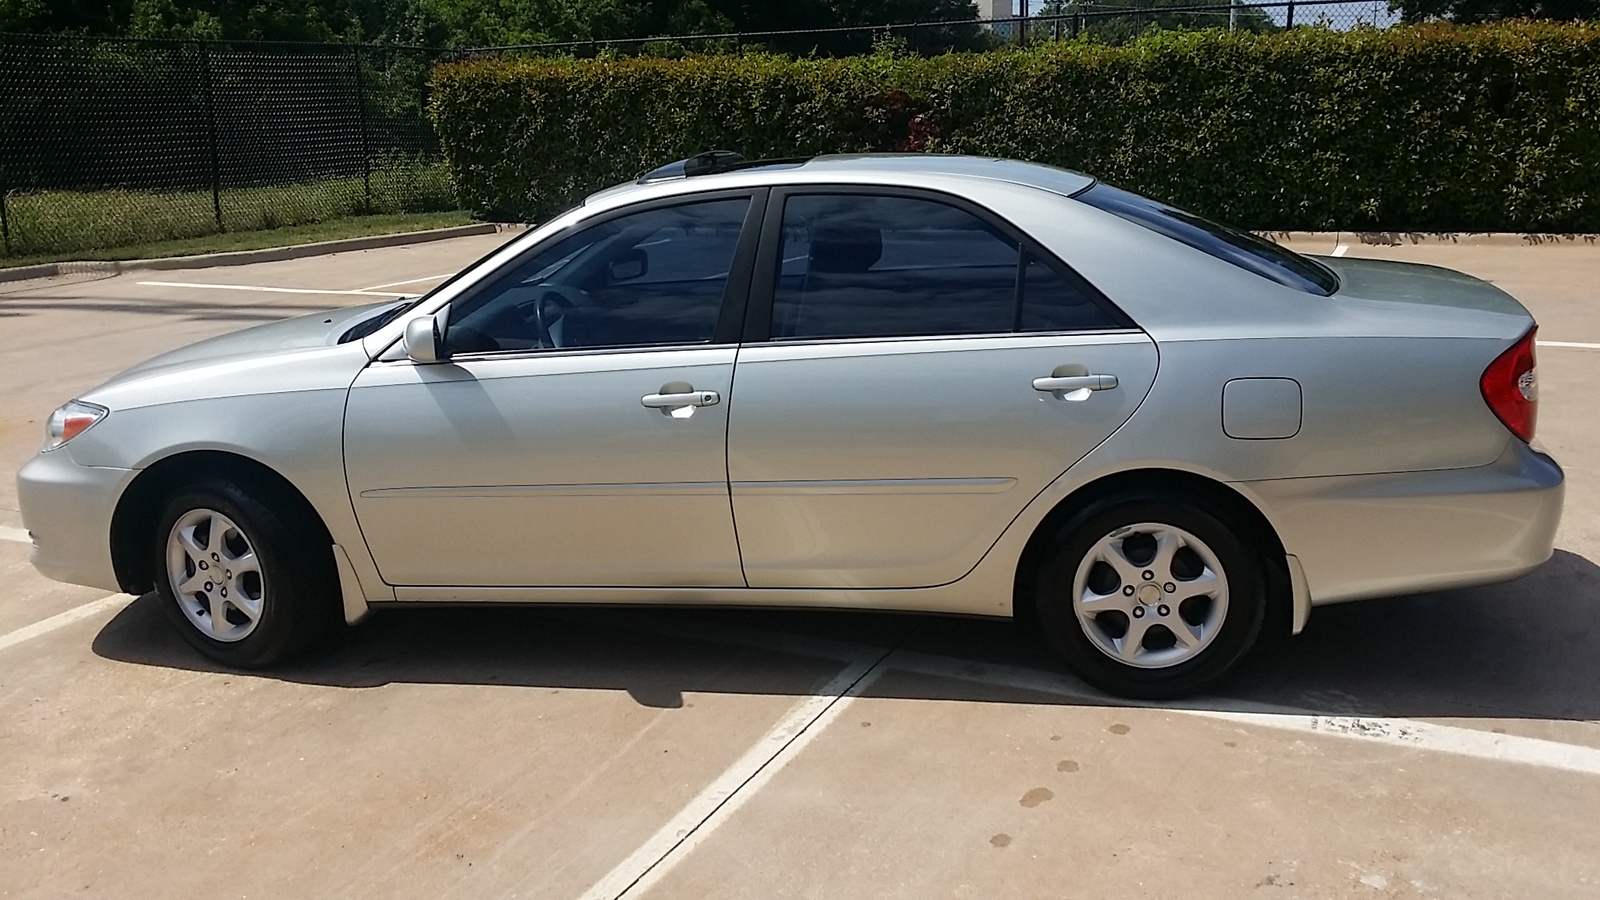 Exterior dimensions 2002 toyota camry